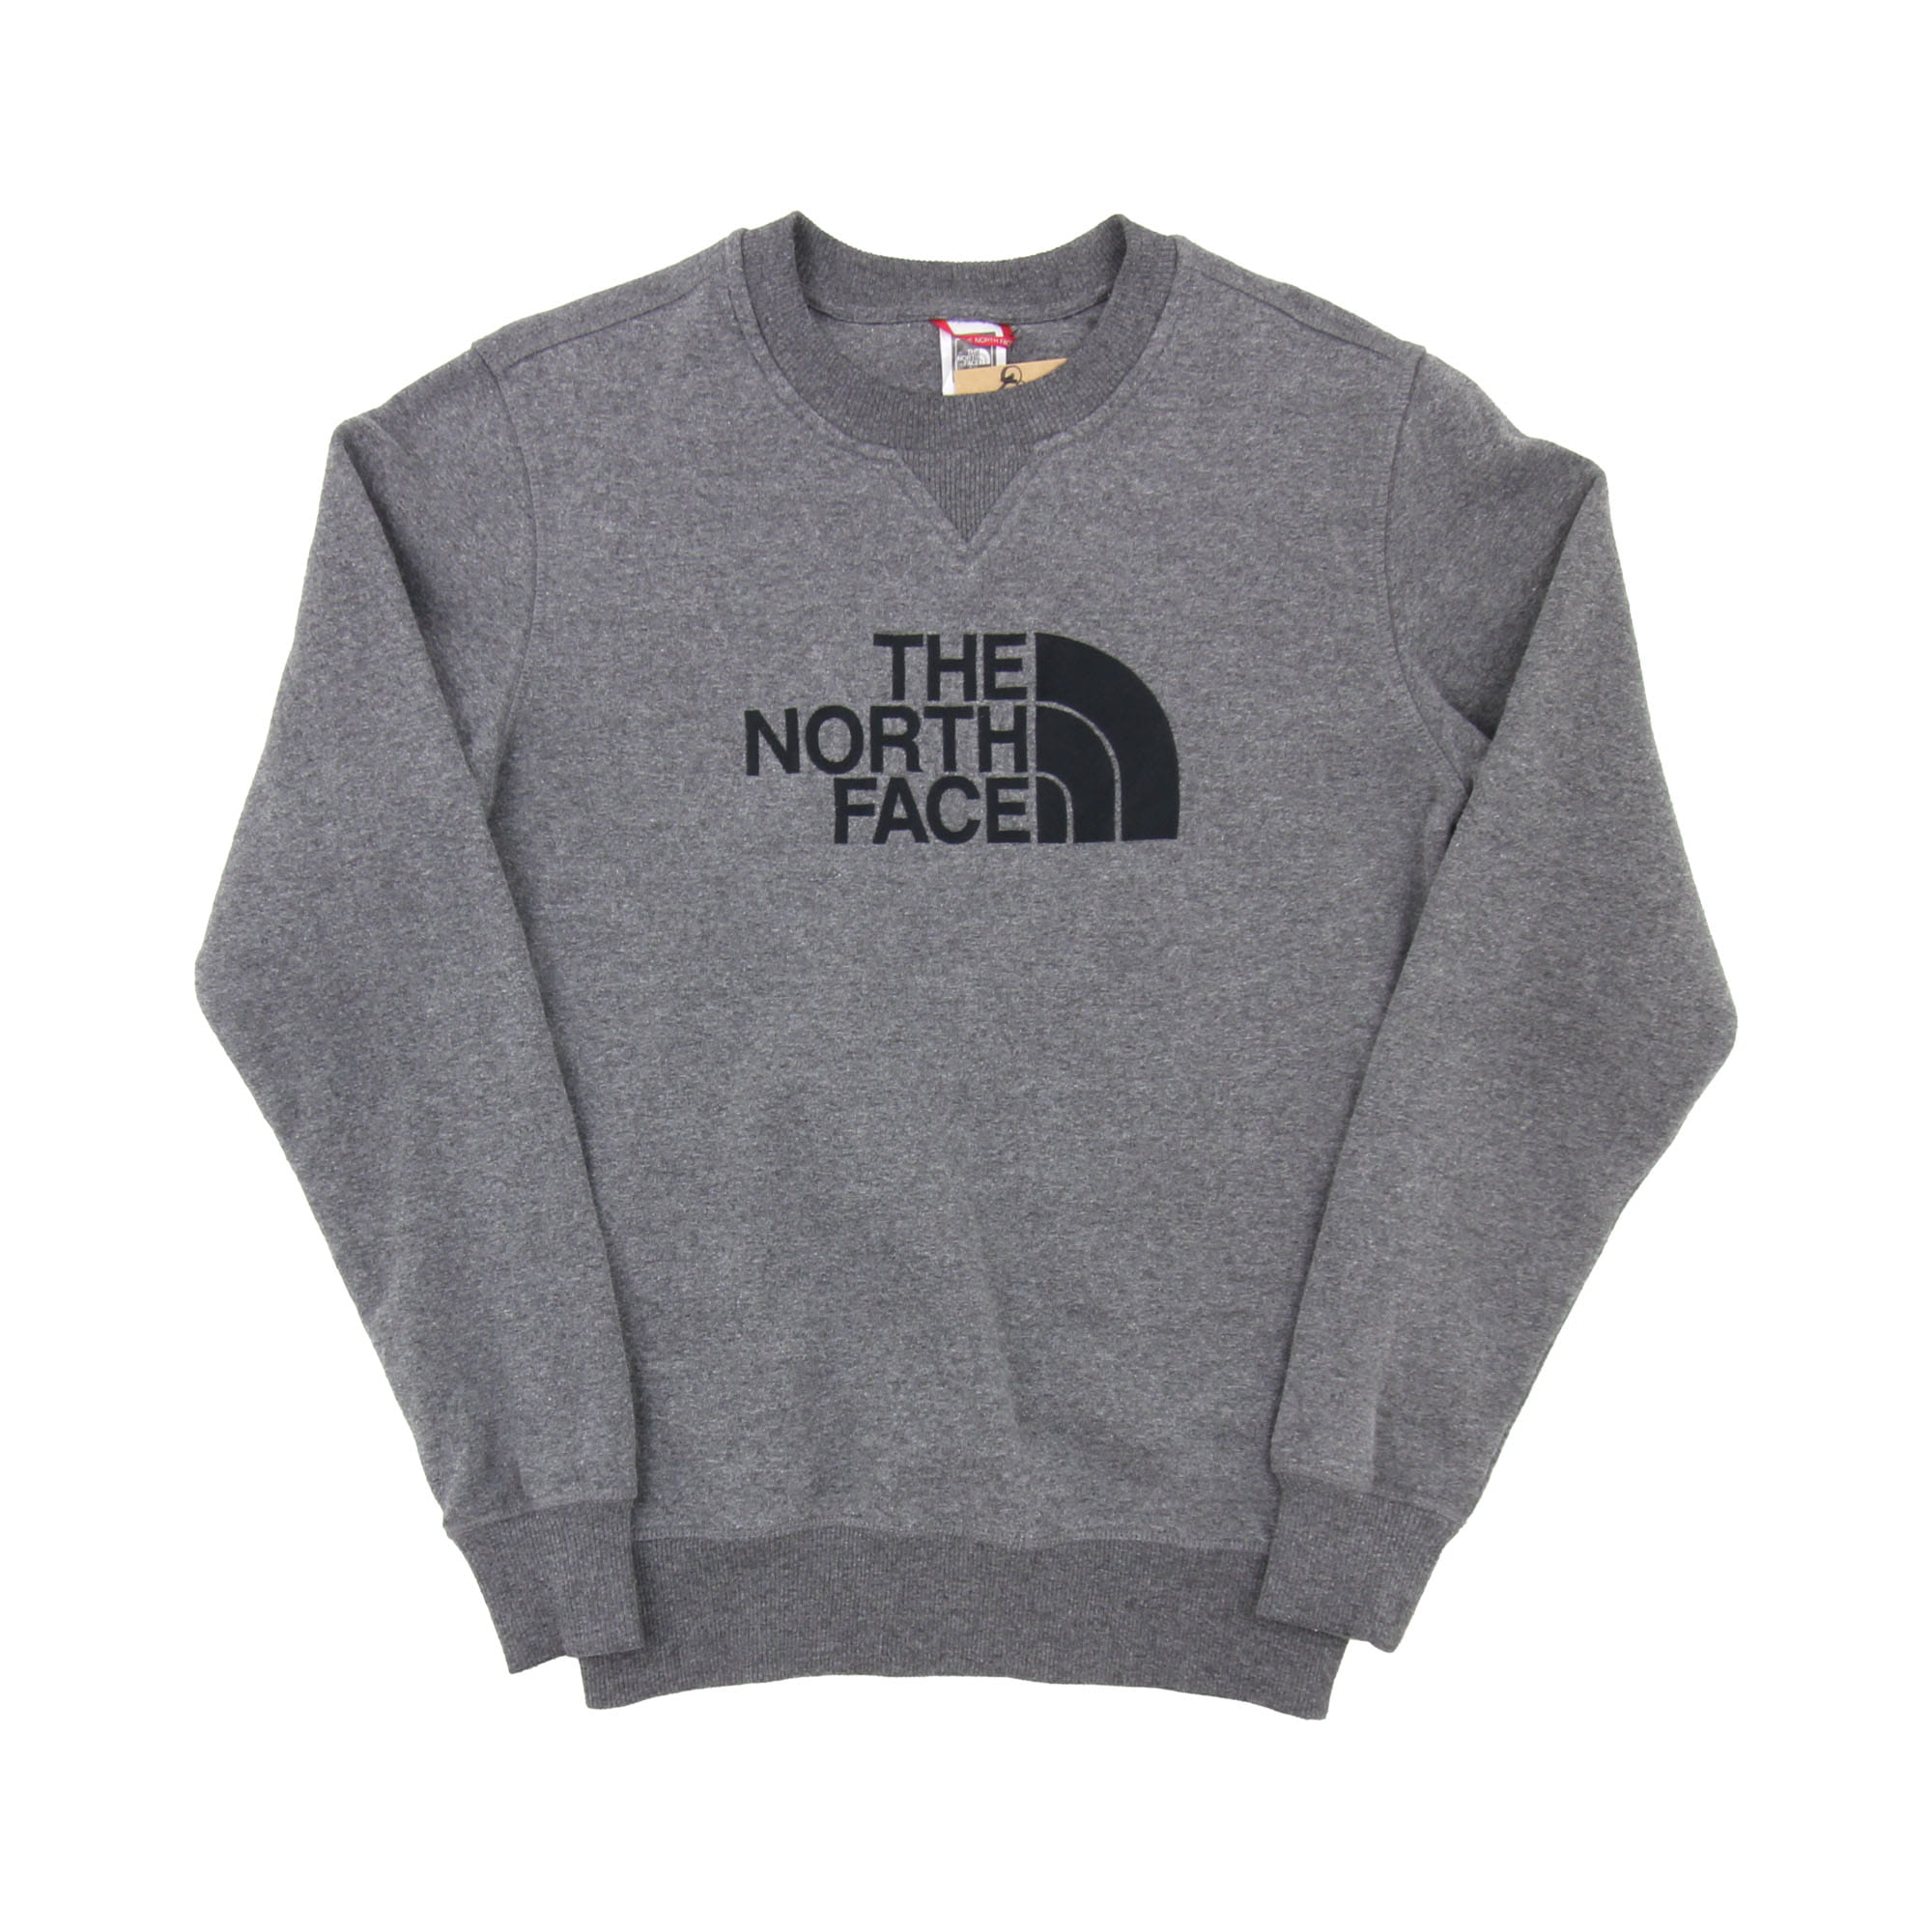 The North Face Front & Back Embroidered Logo Sweatshirt -  S